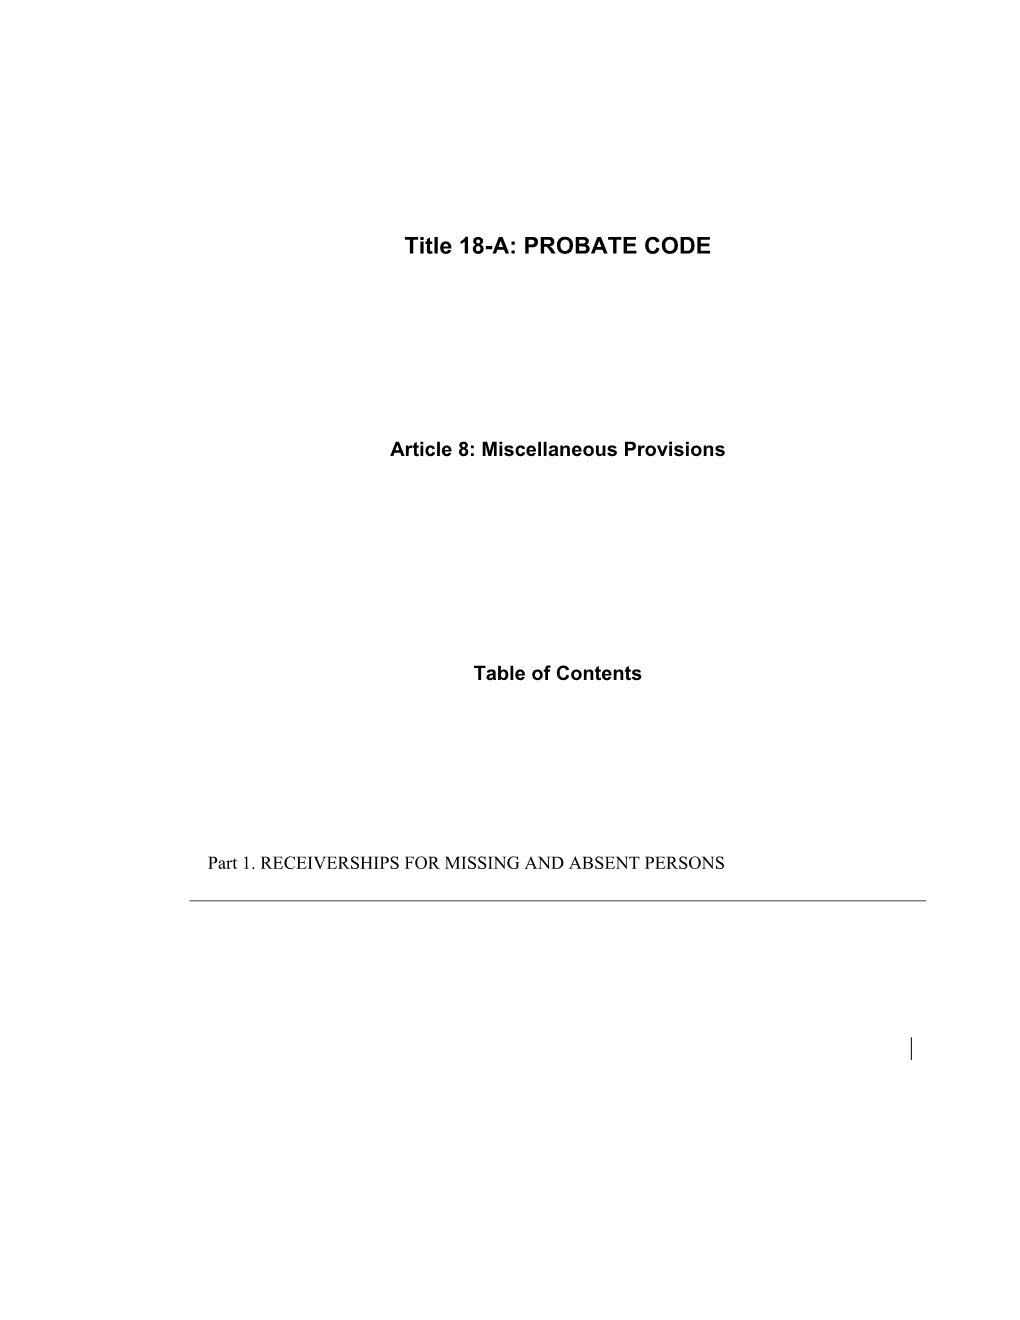 MRS Title 18-A, Article8: MISCELLANEOUS PROVISIONS